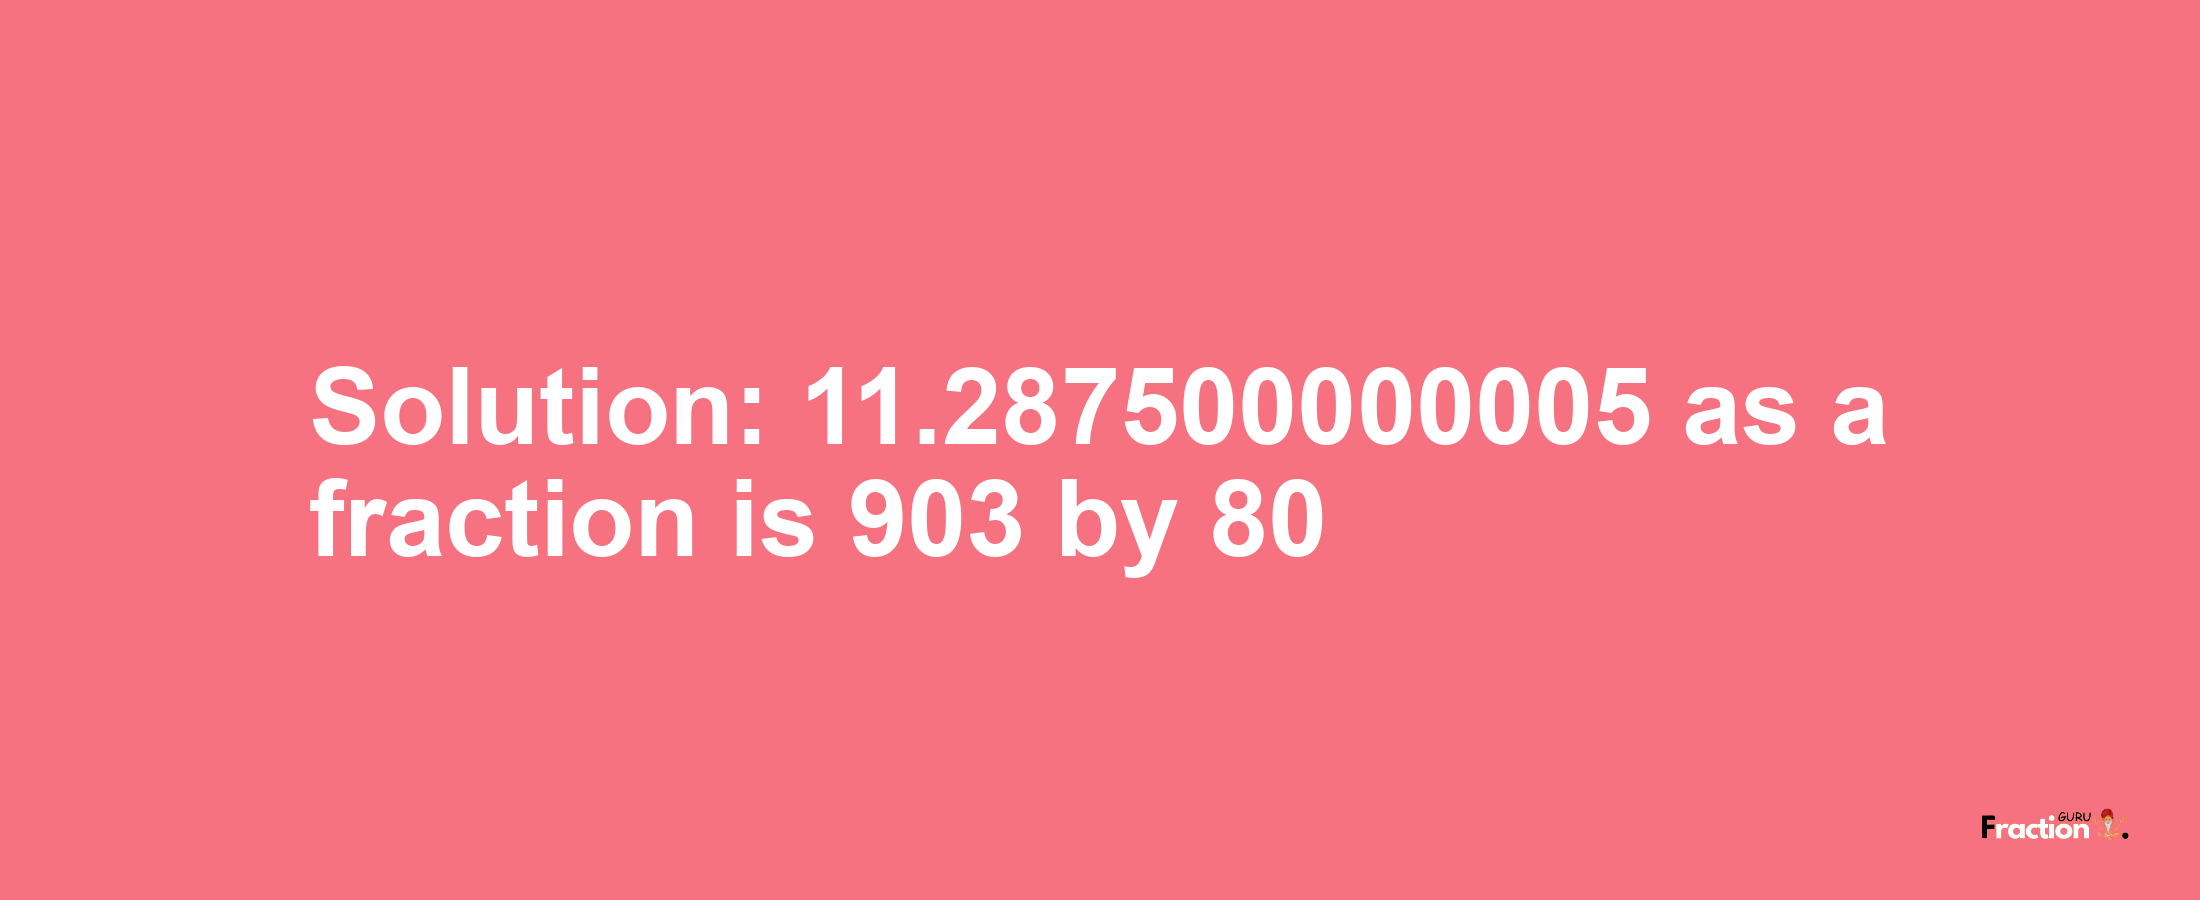 Solution:11.287500000005 as a fraction is 903/80